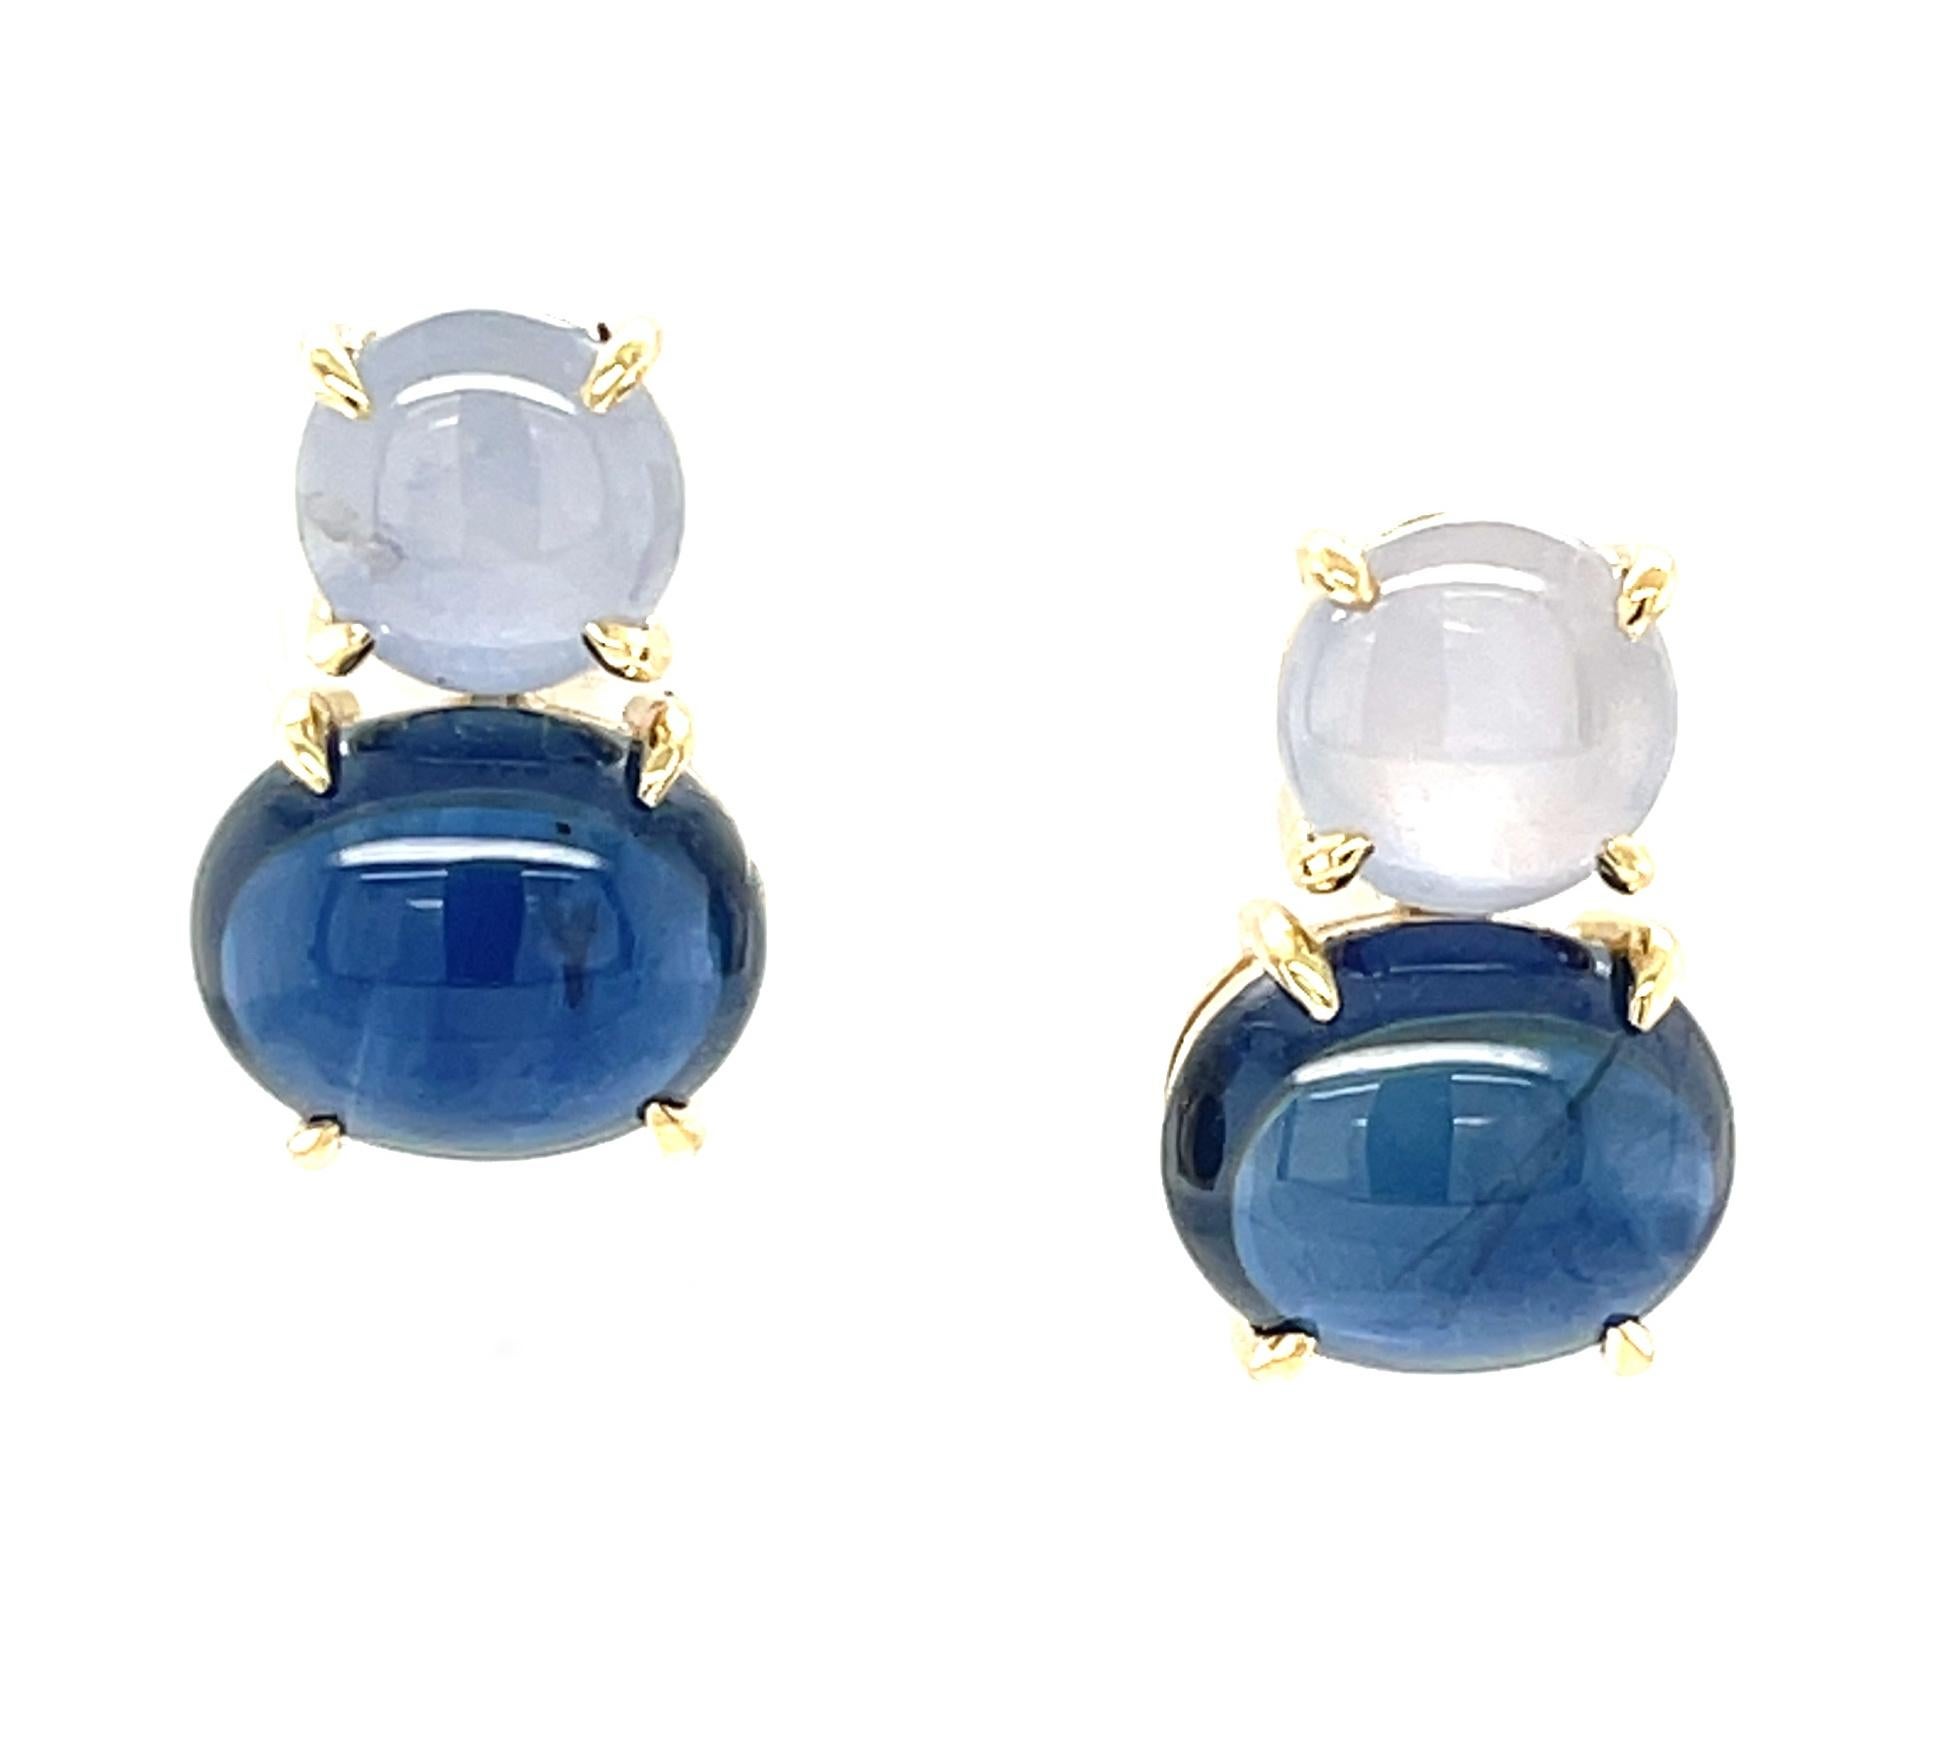 These striking earrings feature beautiful blue sapphire cabochons set in 18k yellow gold with silver star sapphires! Star sapphire exhibit a phenomenon called asterism, a visual effect that occurs as light reflects from natural 